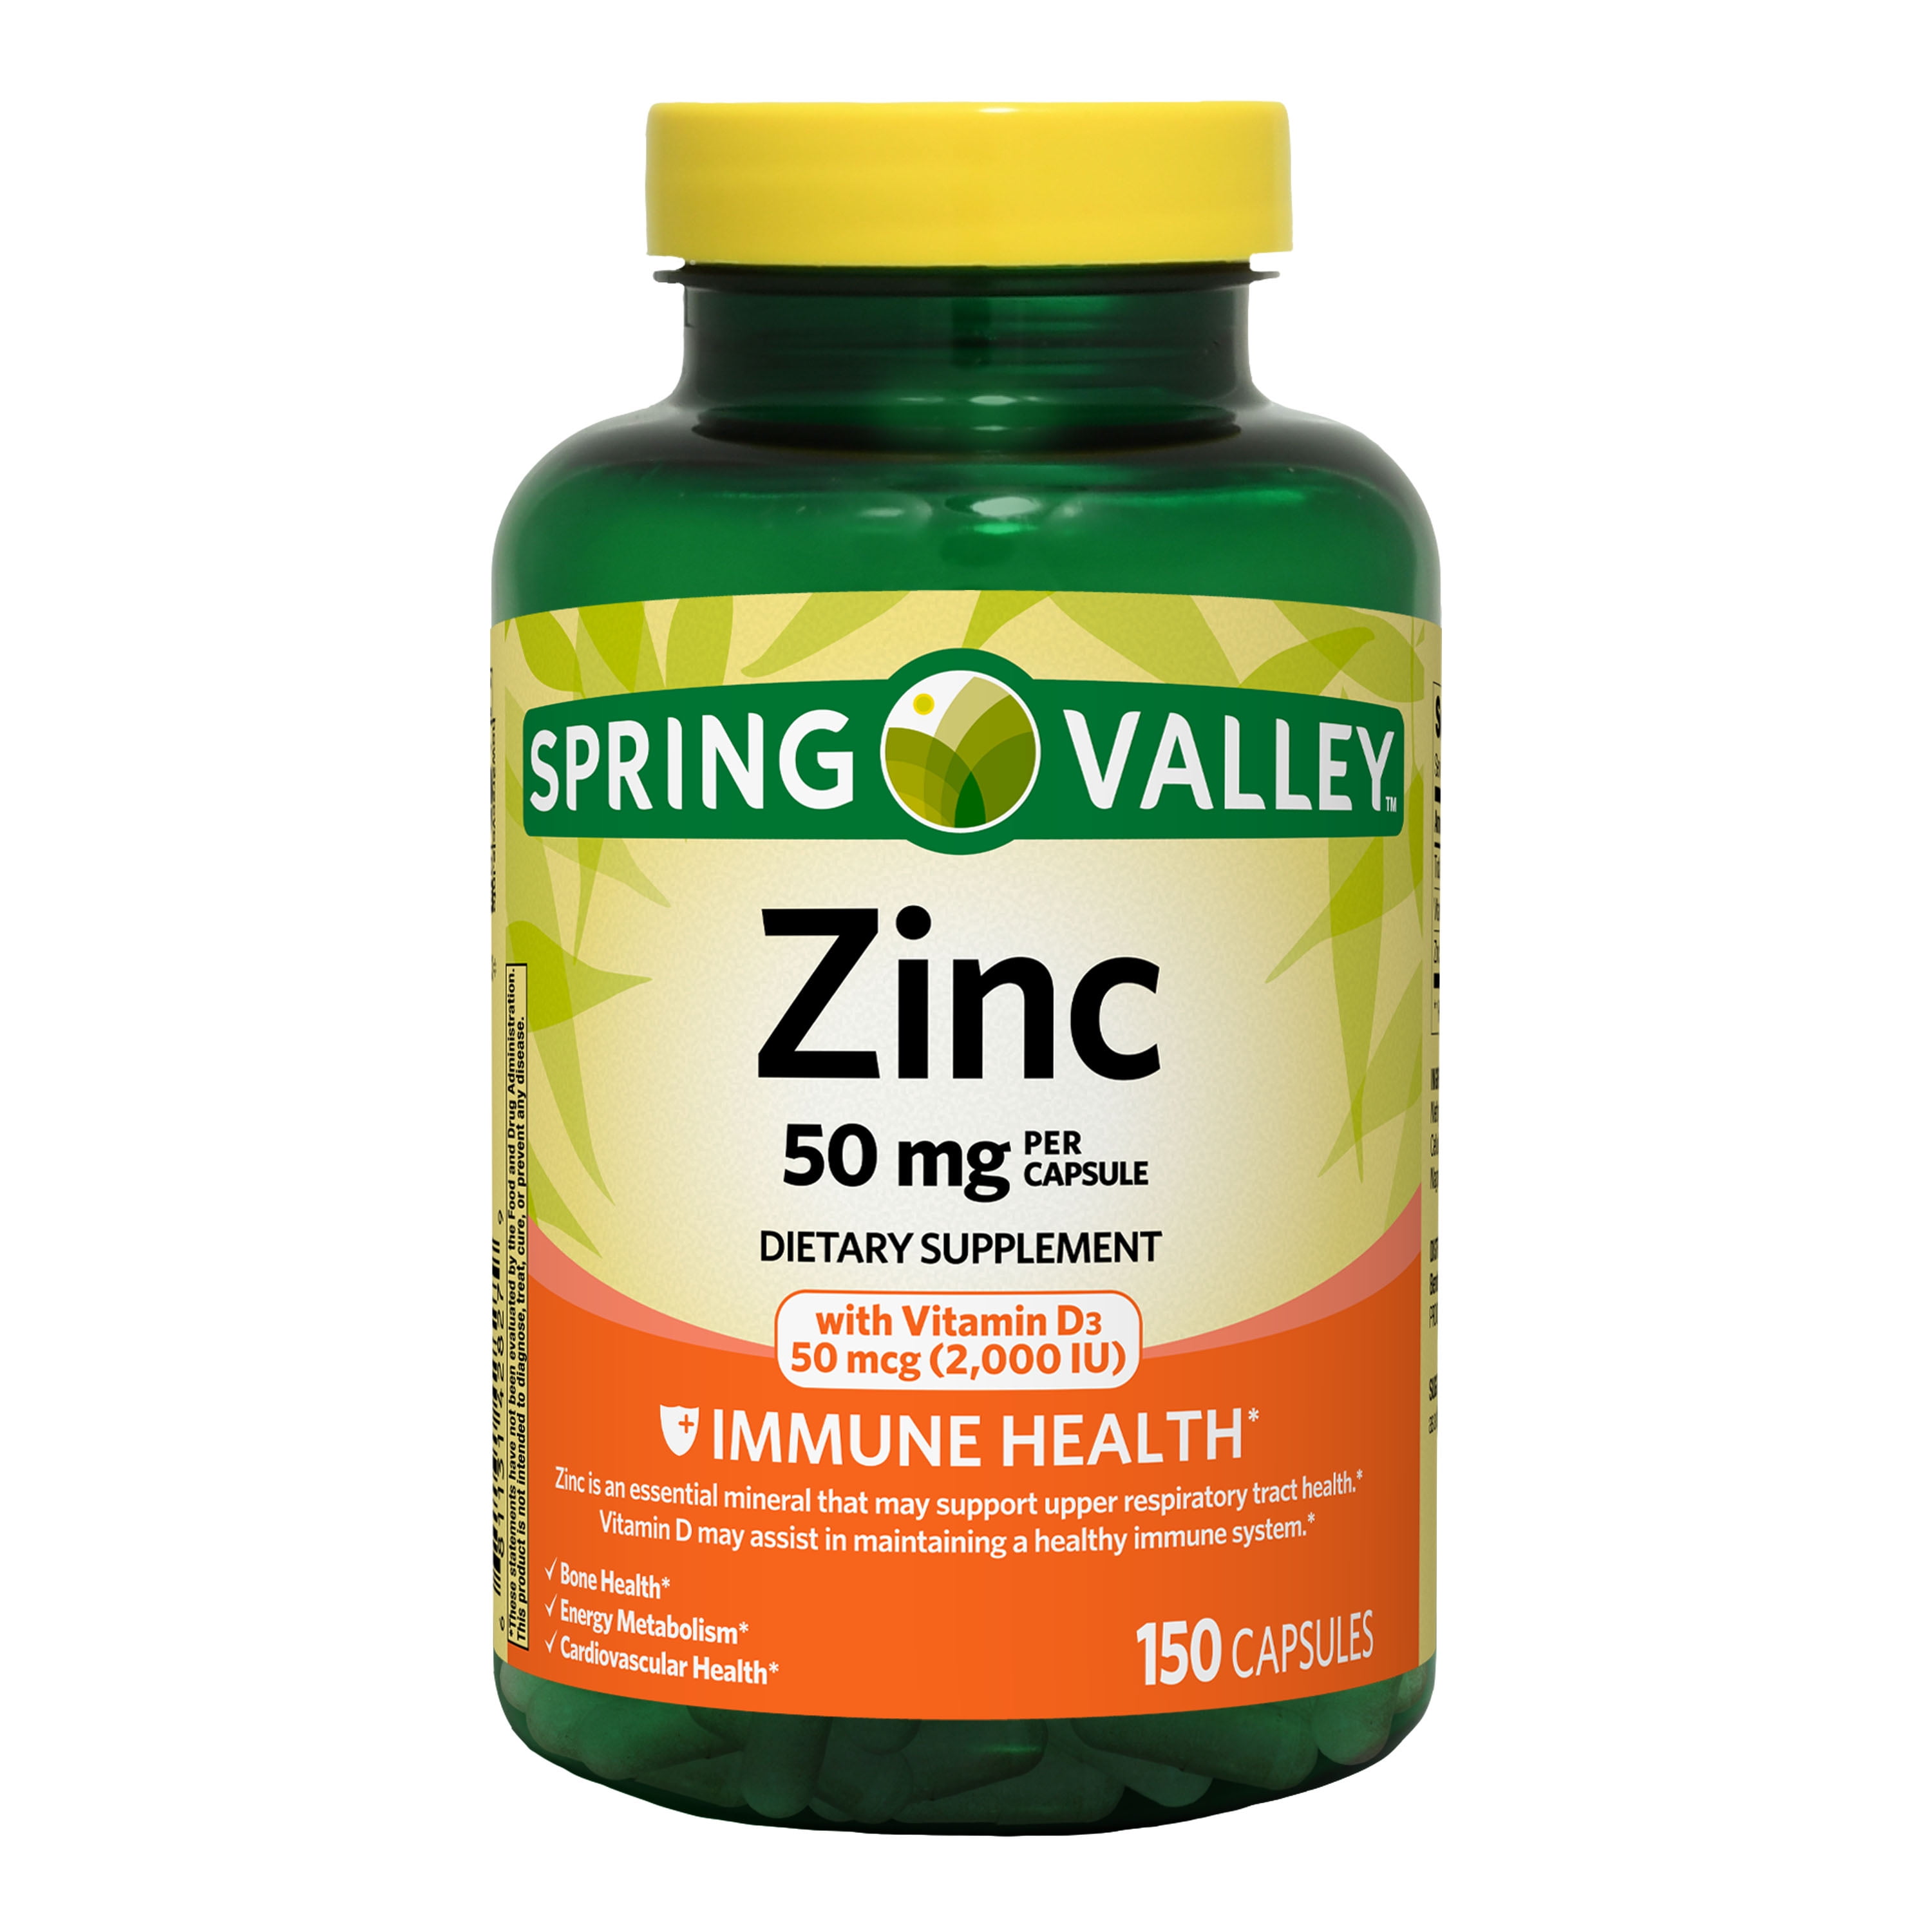 Spring Valley Zinc with Vitamin D Capsules Dietary Supplement, 50 mg, 150 Count